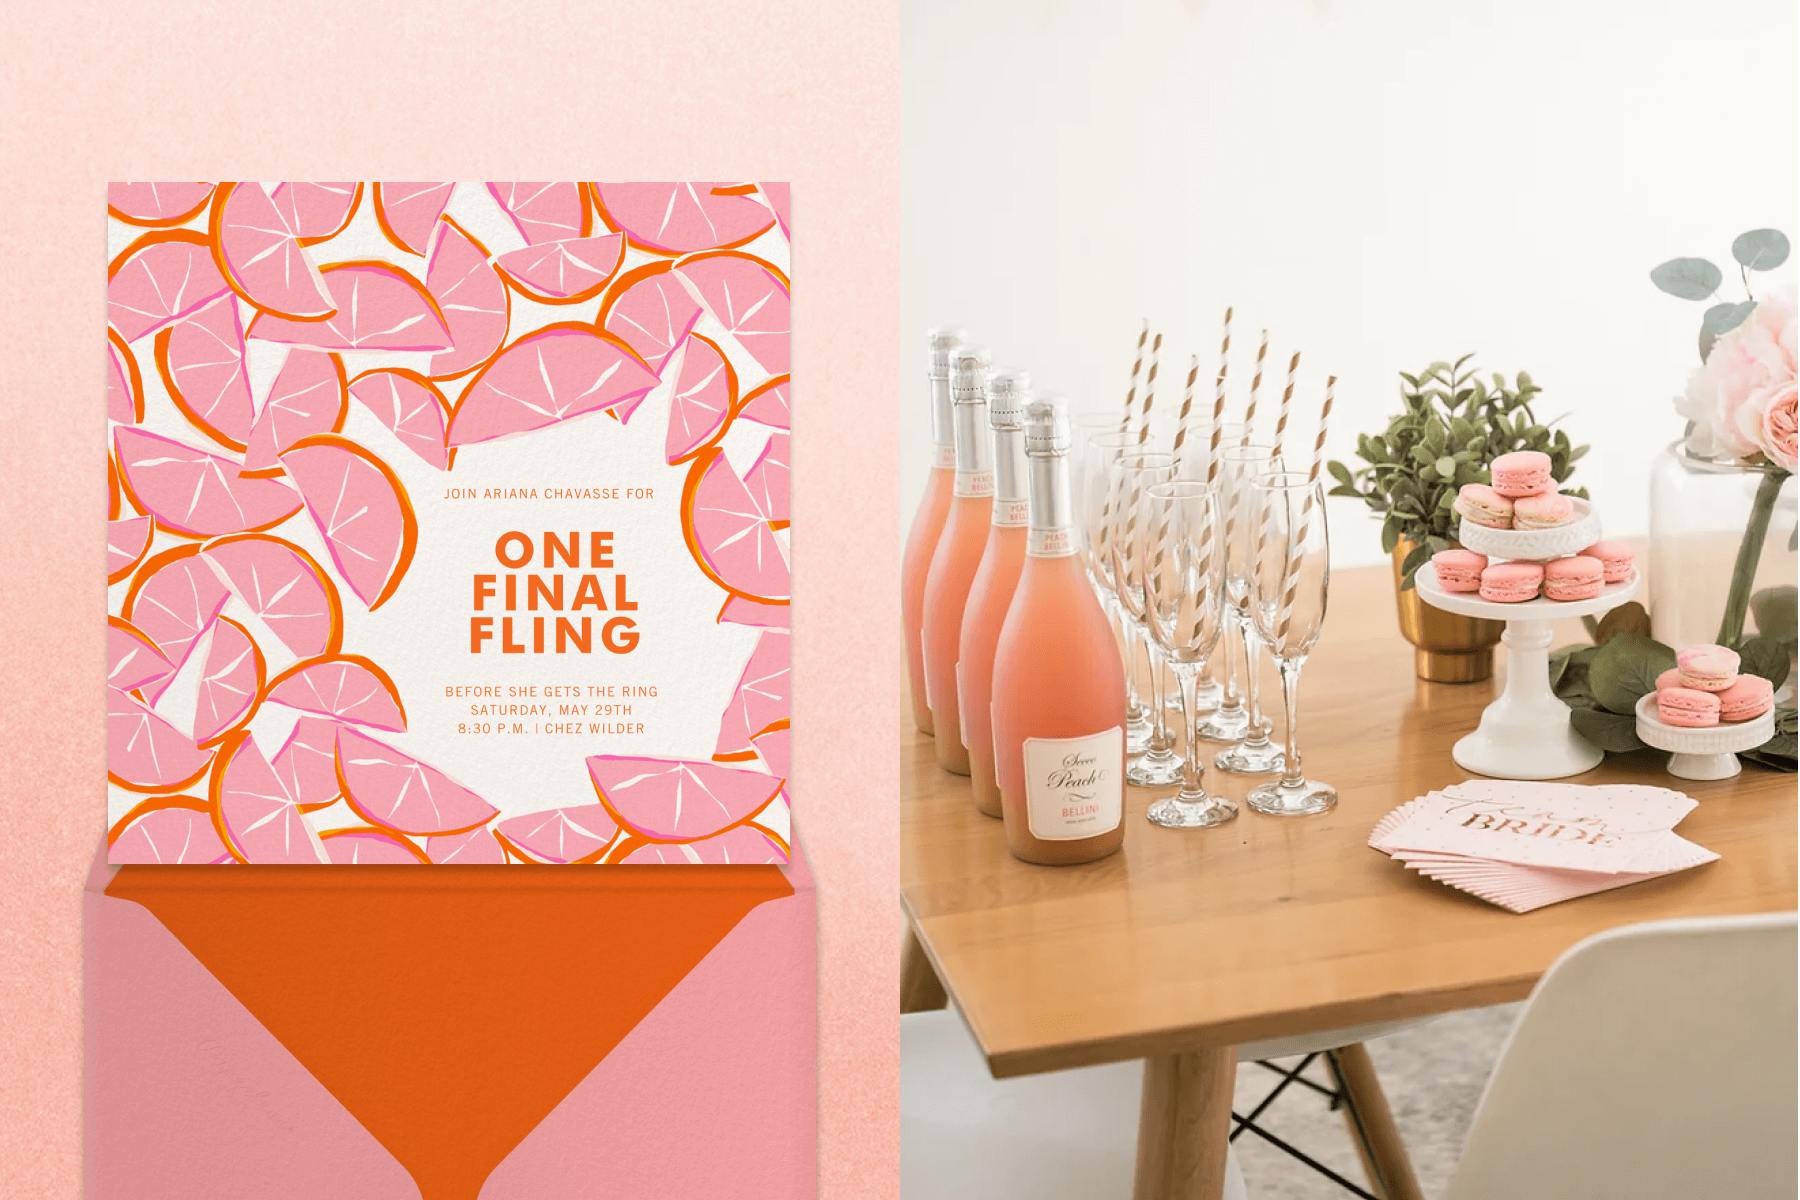 Left: An invitation for “One Final Fling” with overlapping illustrated citrus fruit pieces in pink and orange. Right: A wooden table is ready for a bachelorette party with bottles of pink wine, glasses with straws, “team bride” napkins, and pink macarons.